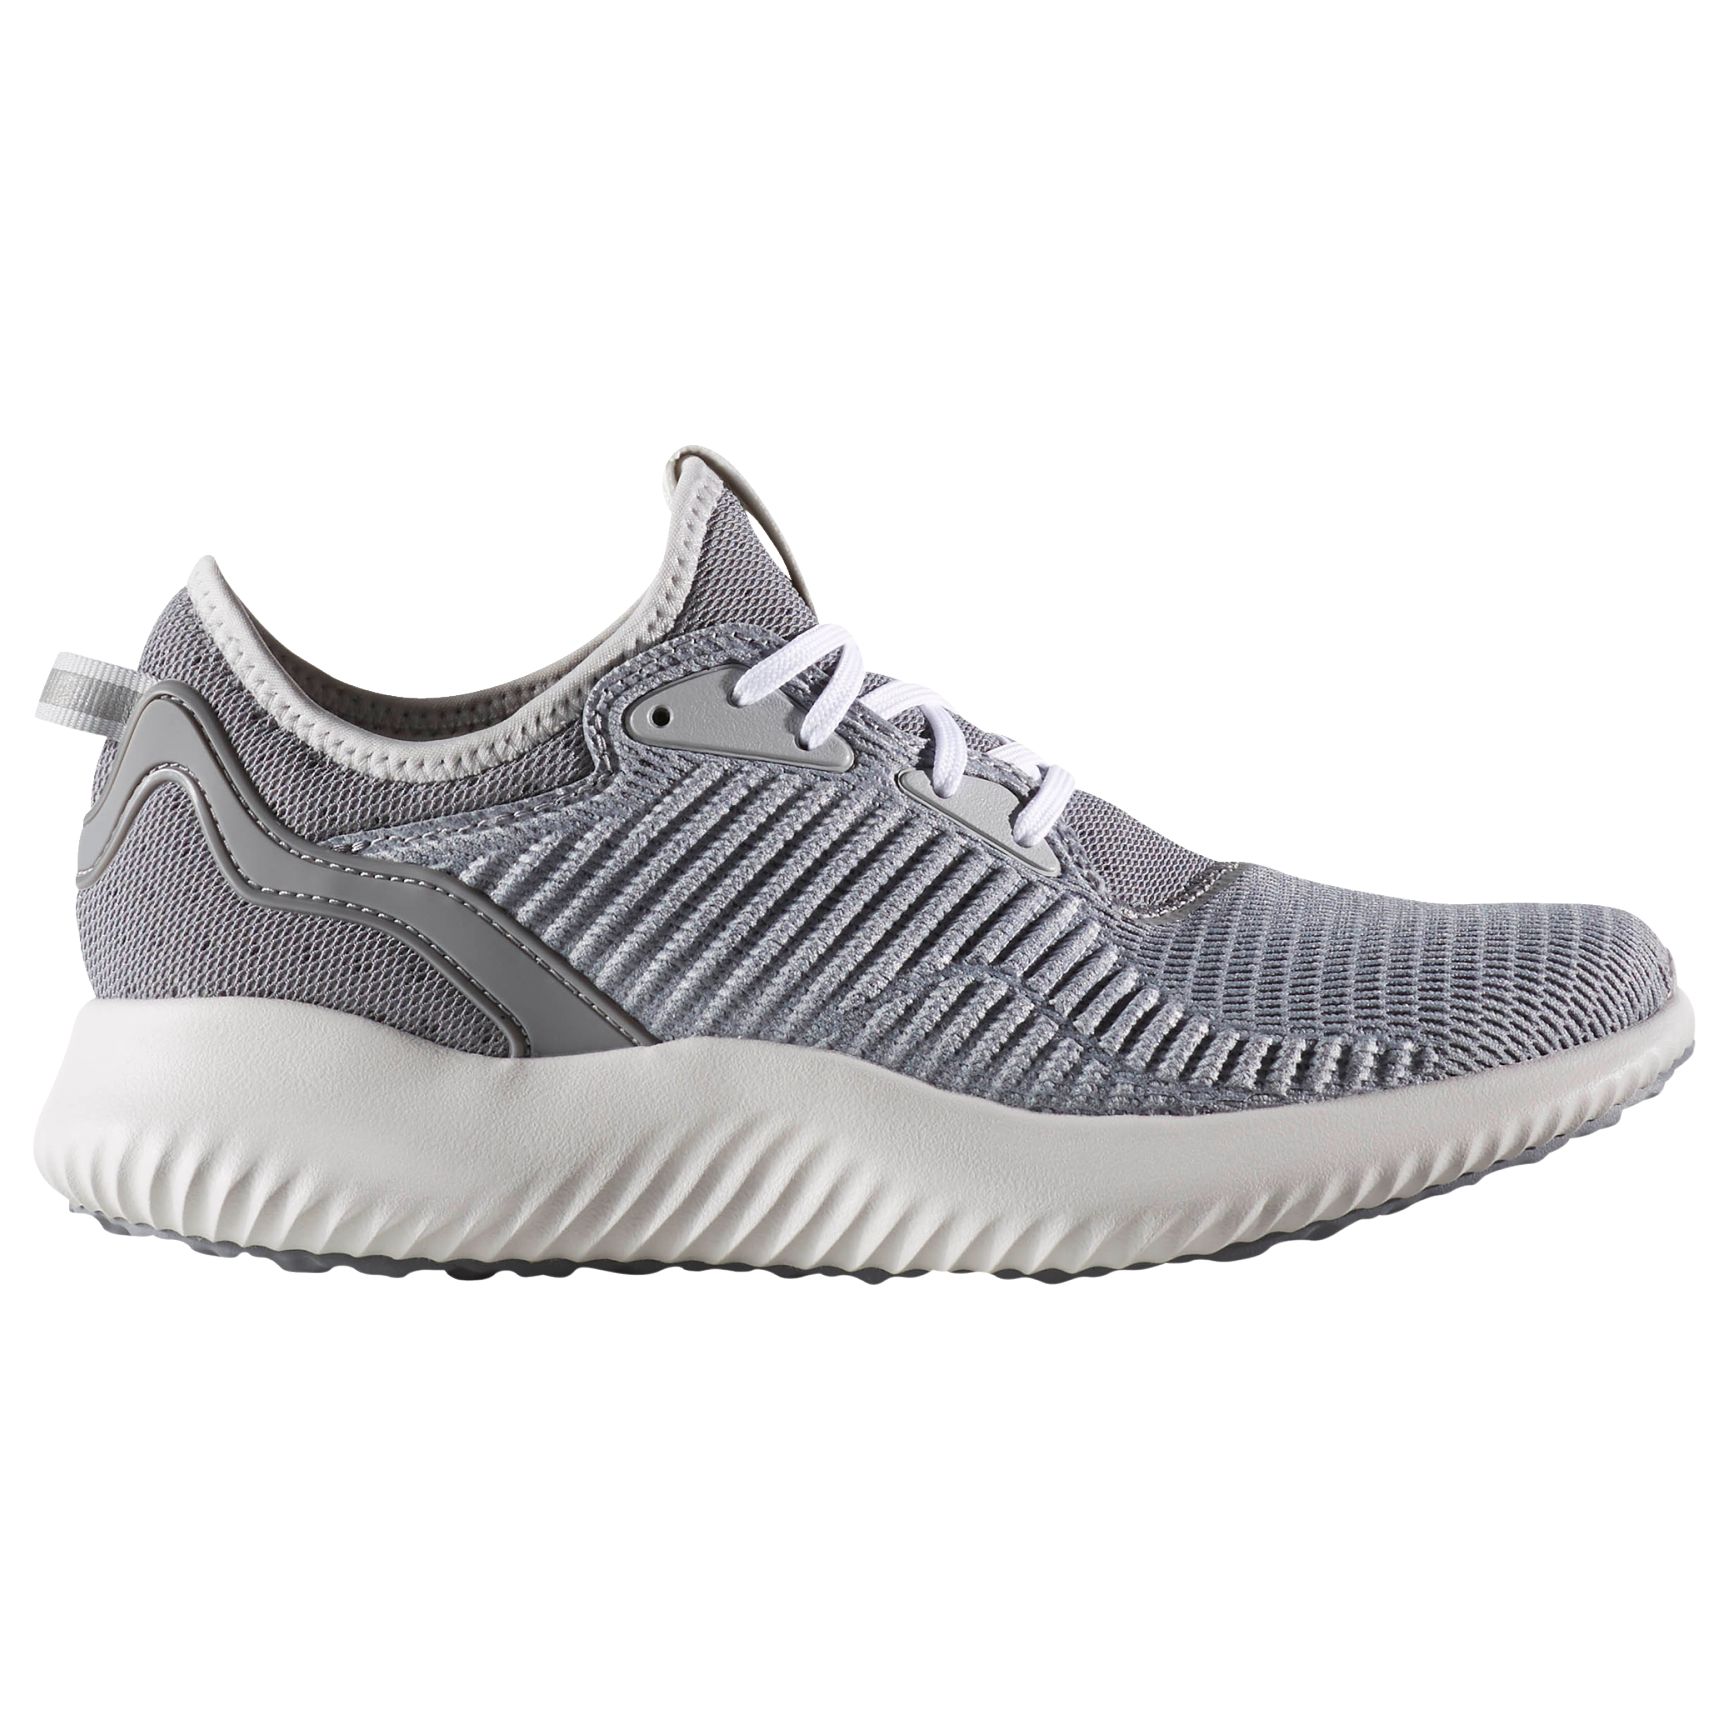 adidas Alphabounce Lux Women's Running Shoes, Grey